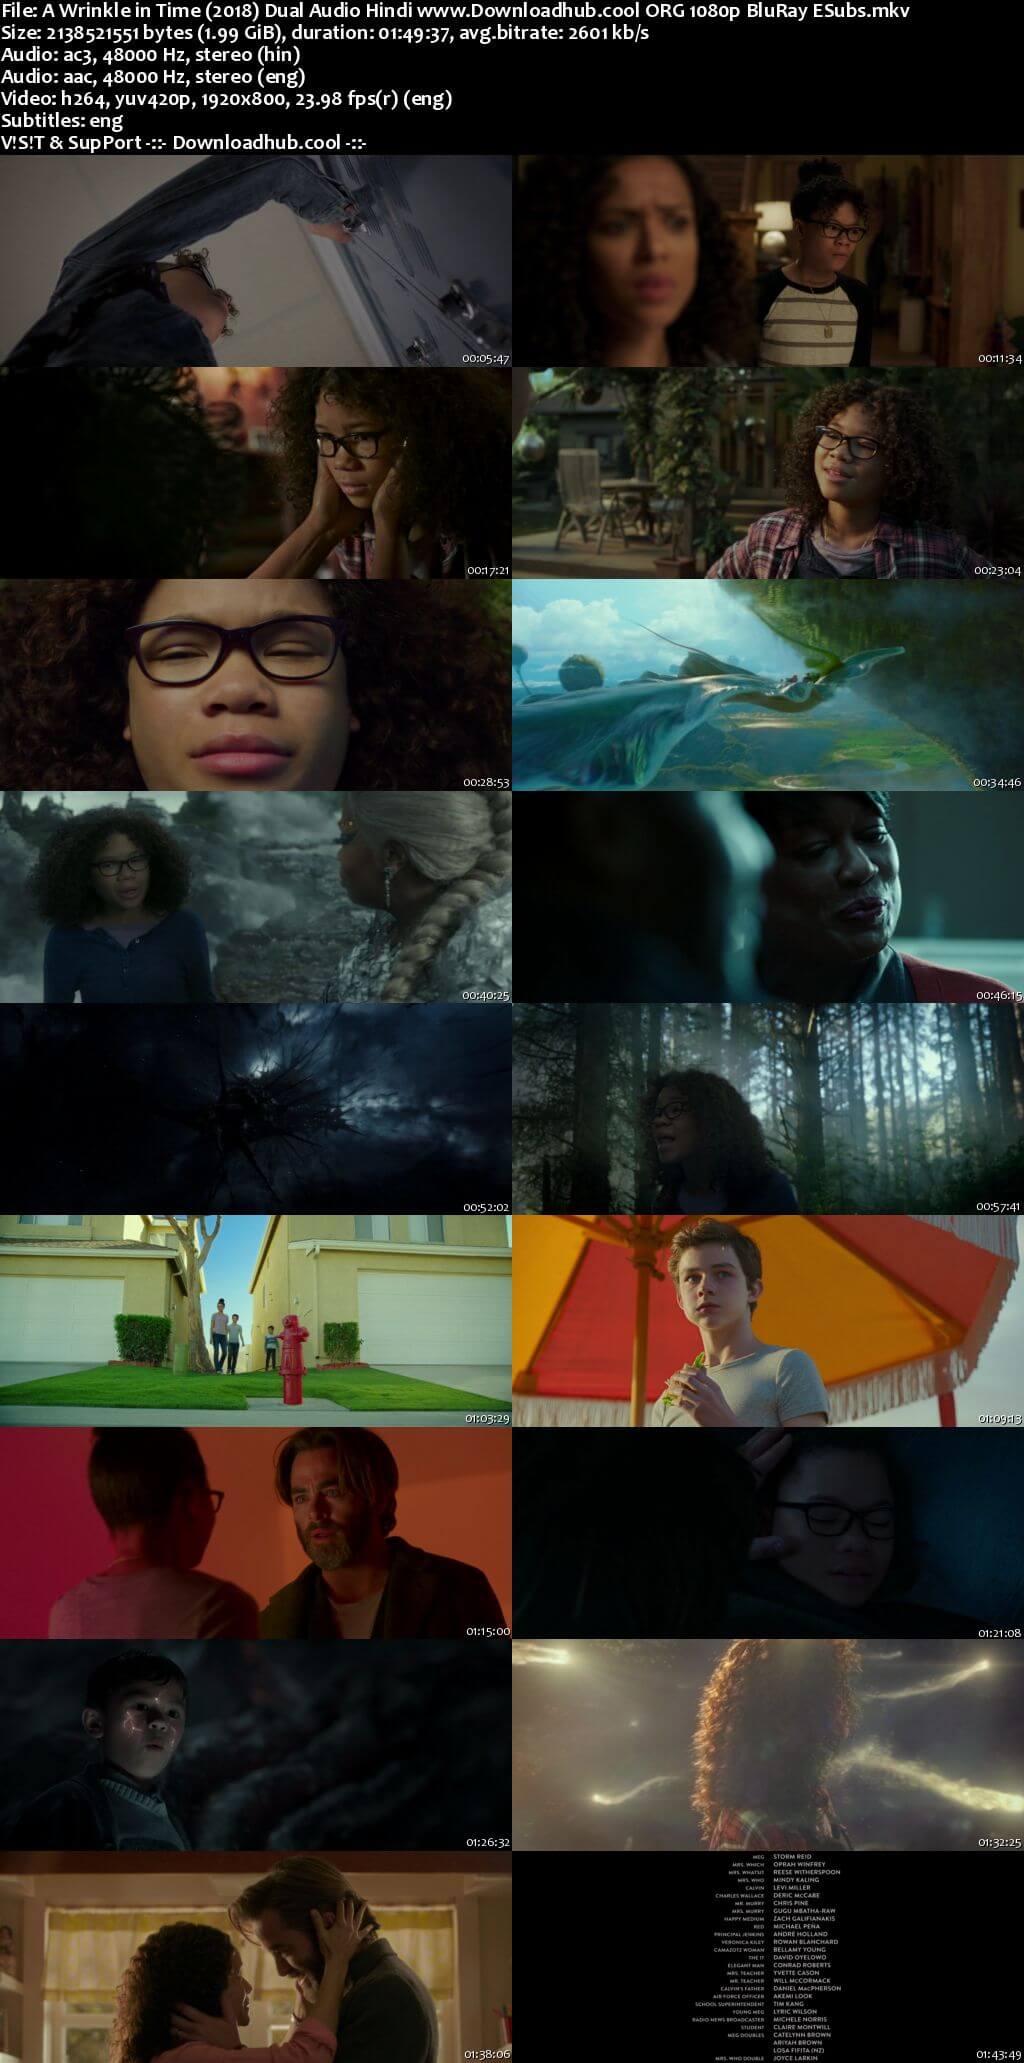 A Wrinkle in Time 2018 Hindi Dual Audio 1080p BluRay ESubs